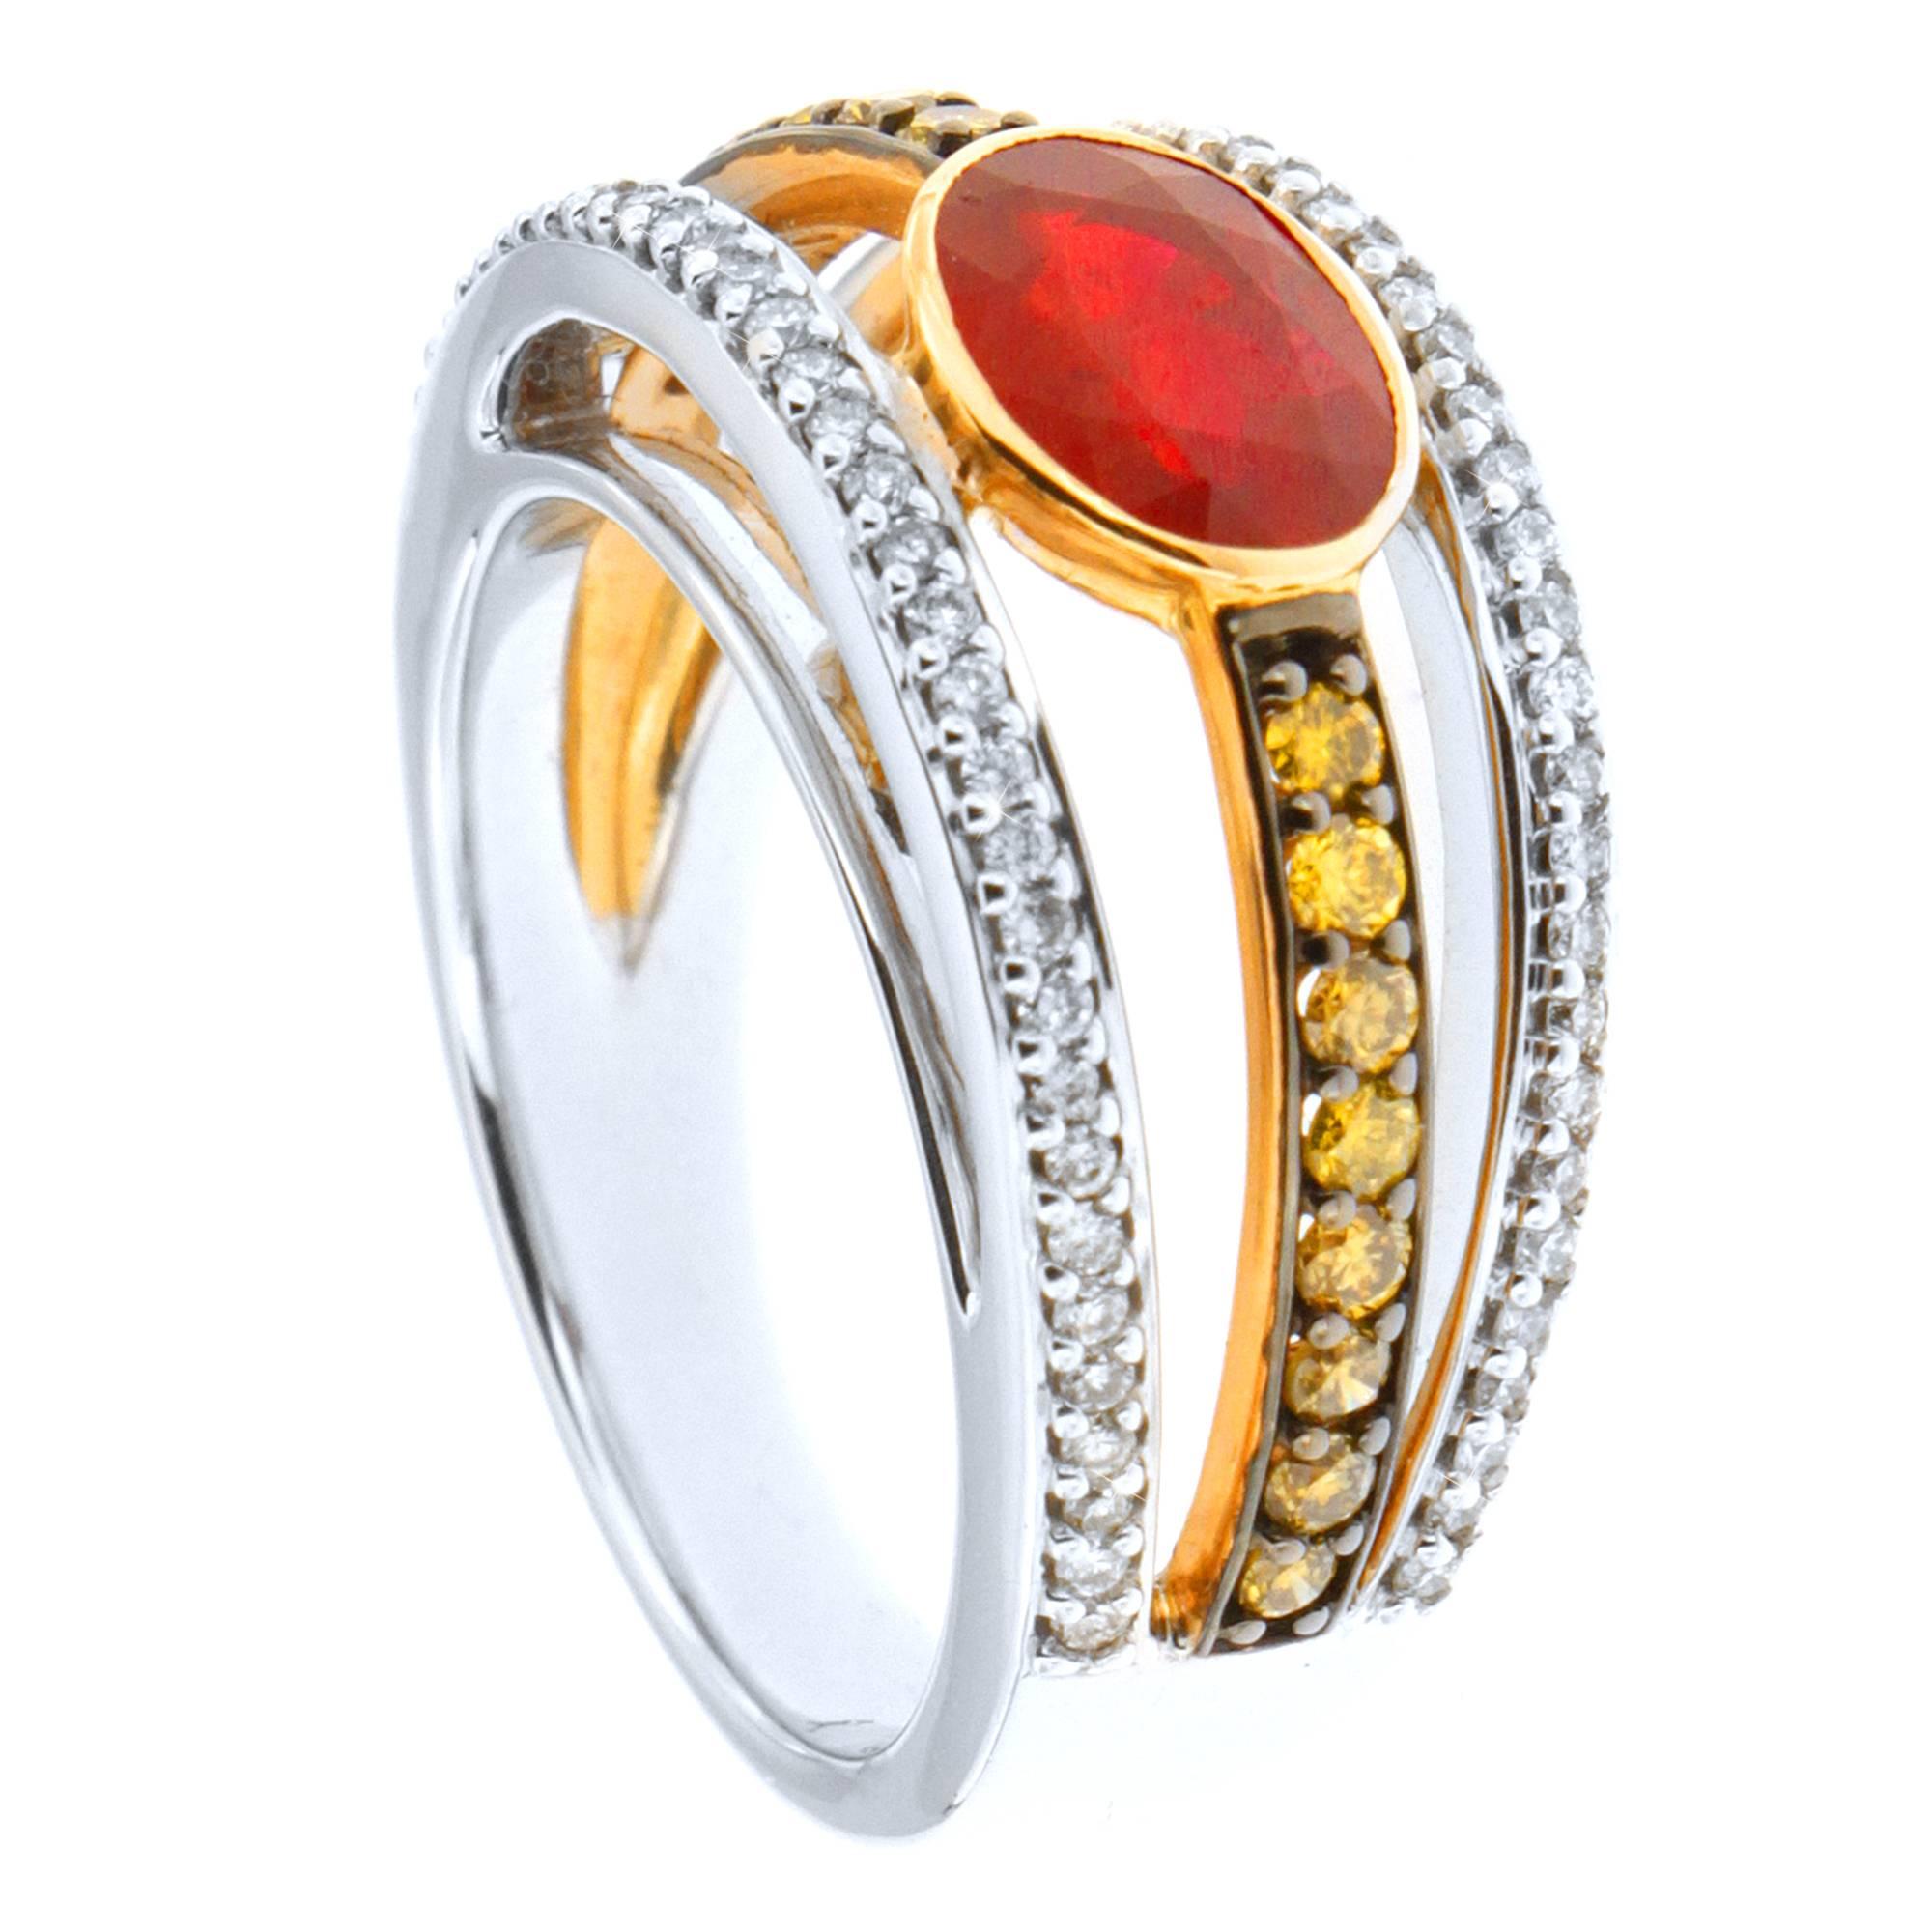 Zorab Creation Ruby with White and Yellow Diamonds Gold Ring For Sale